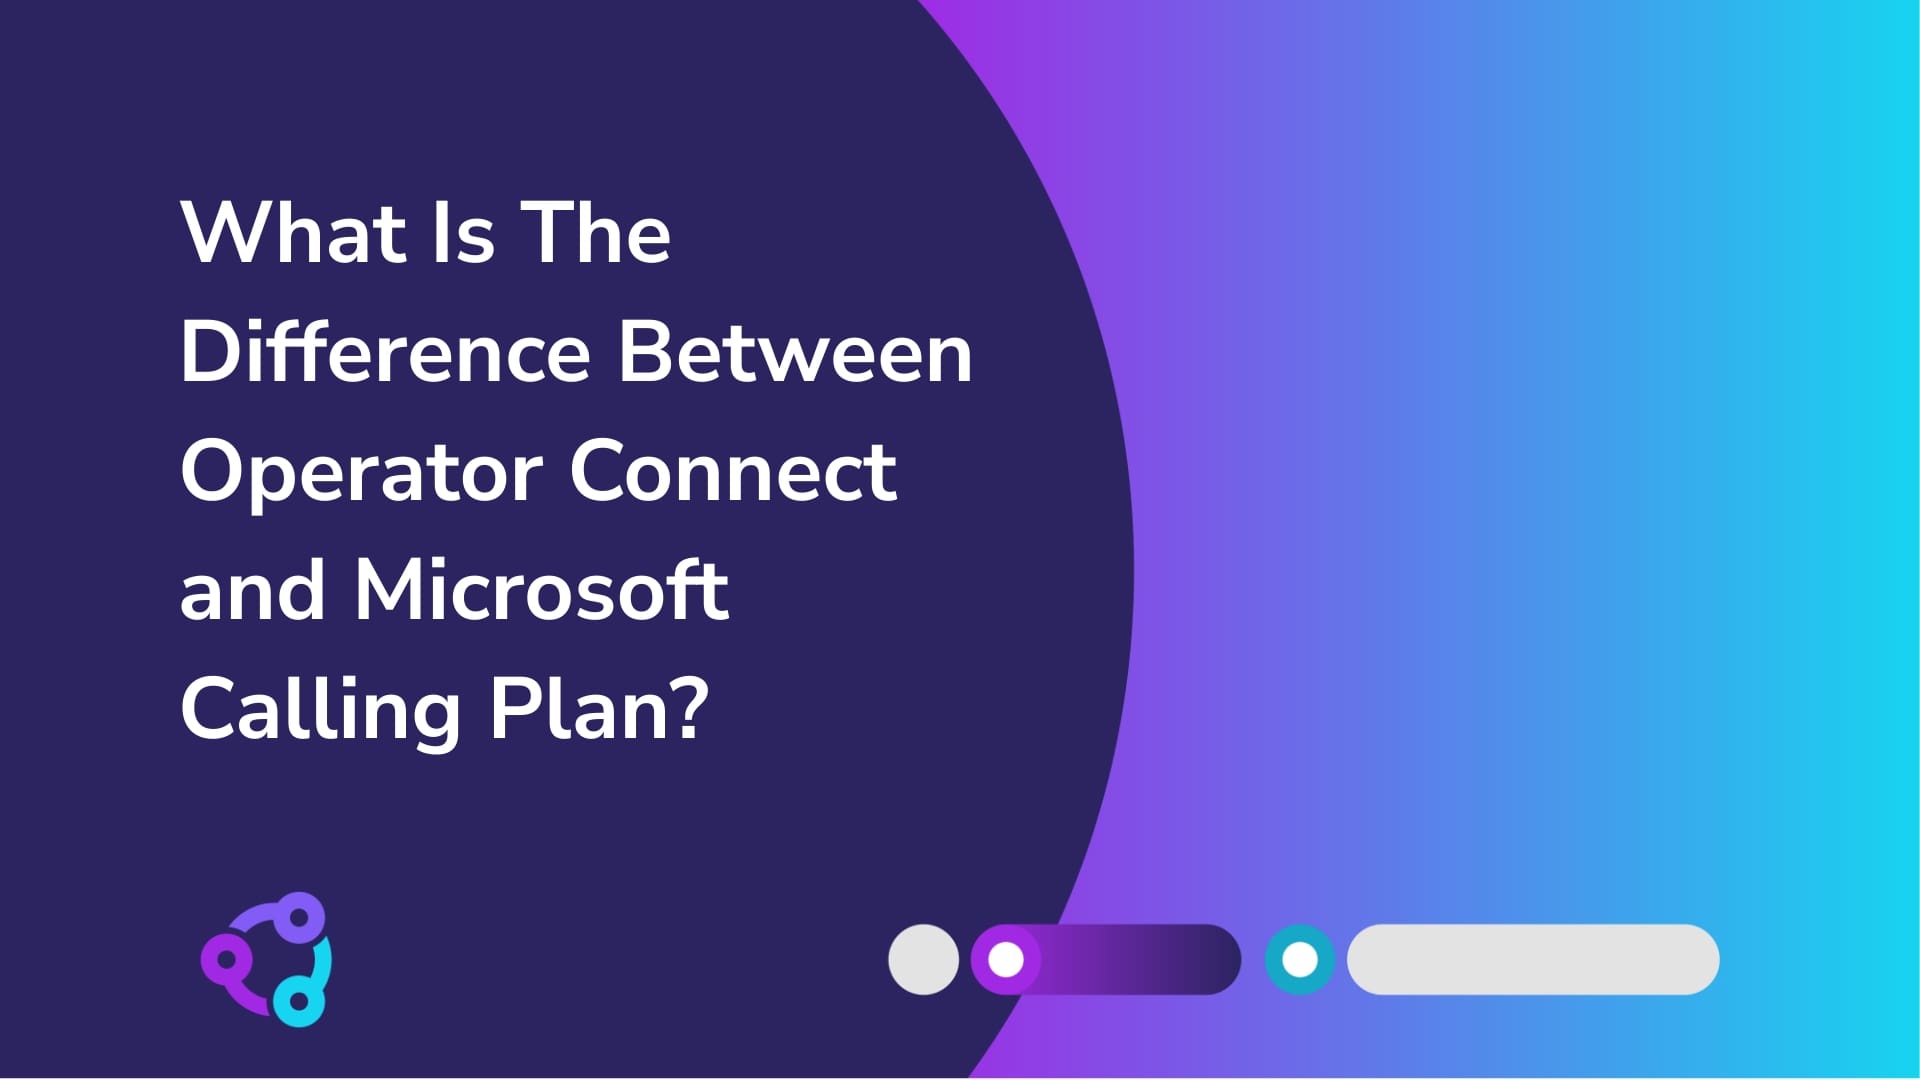 What is the difference between Operator Connect and Microsoft Calling Plan?